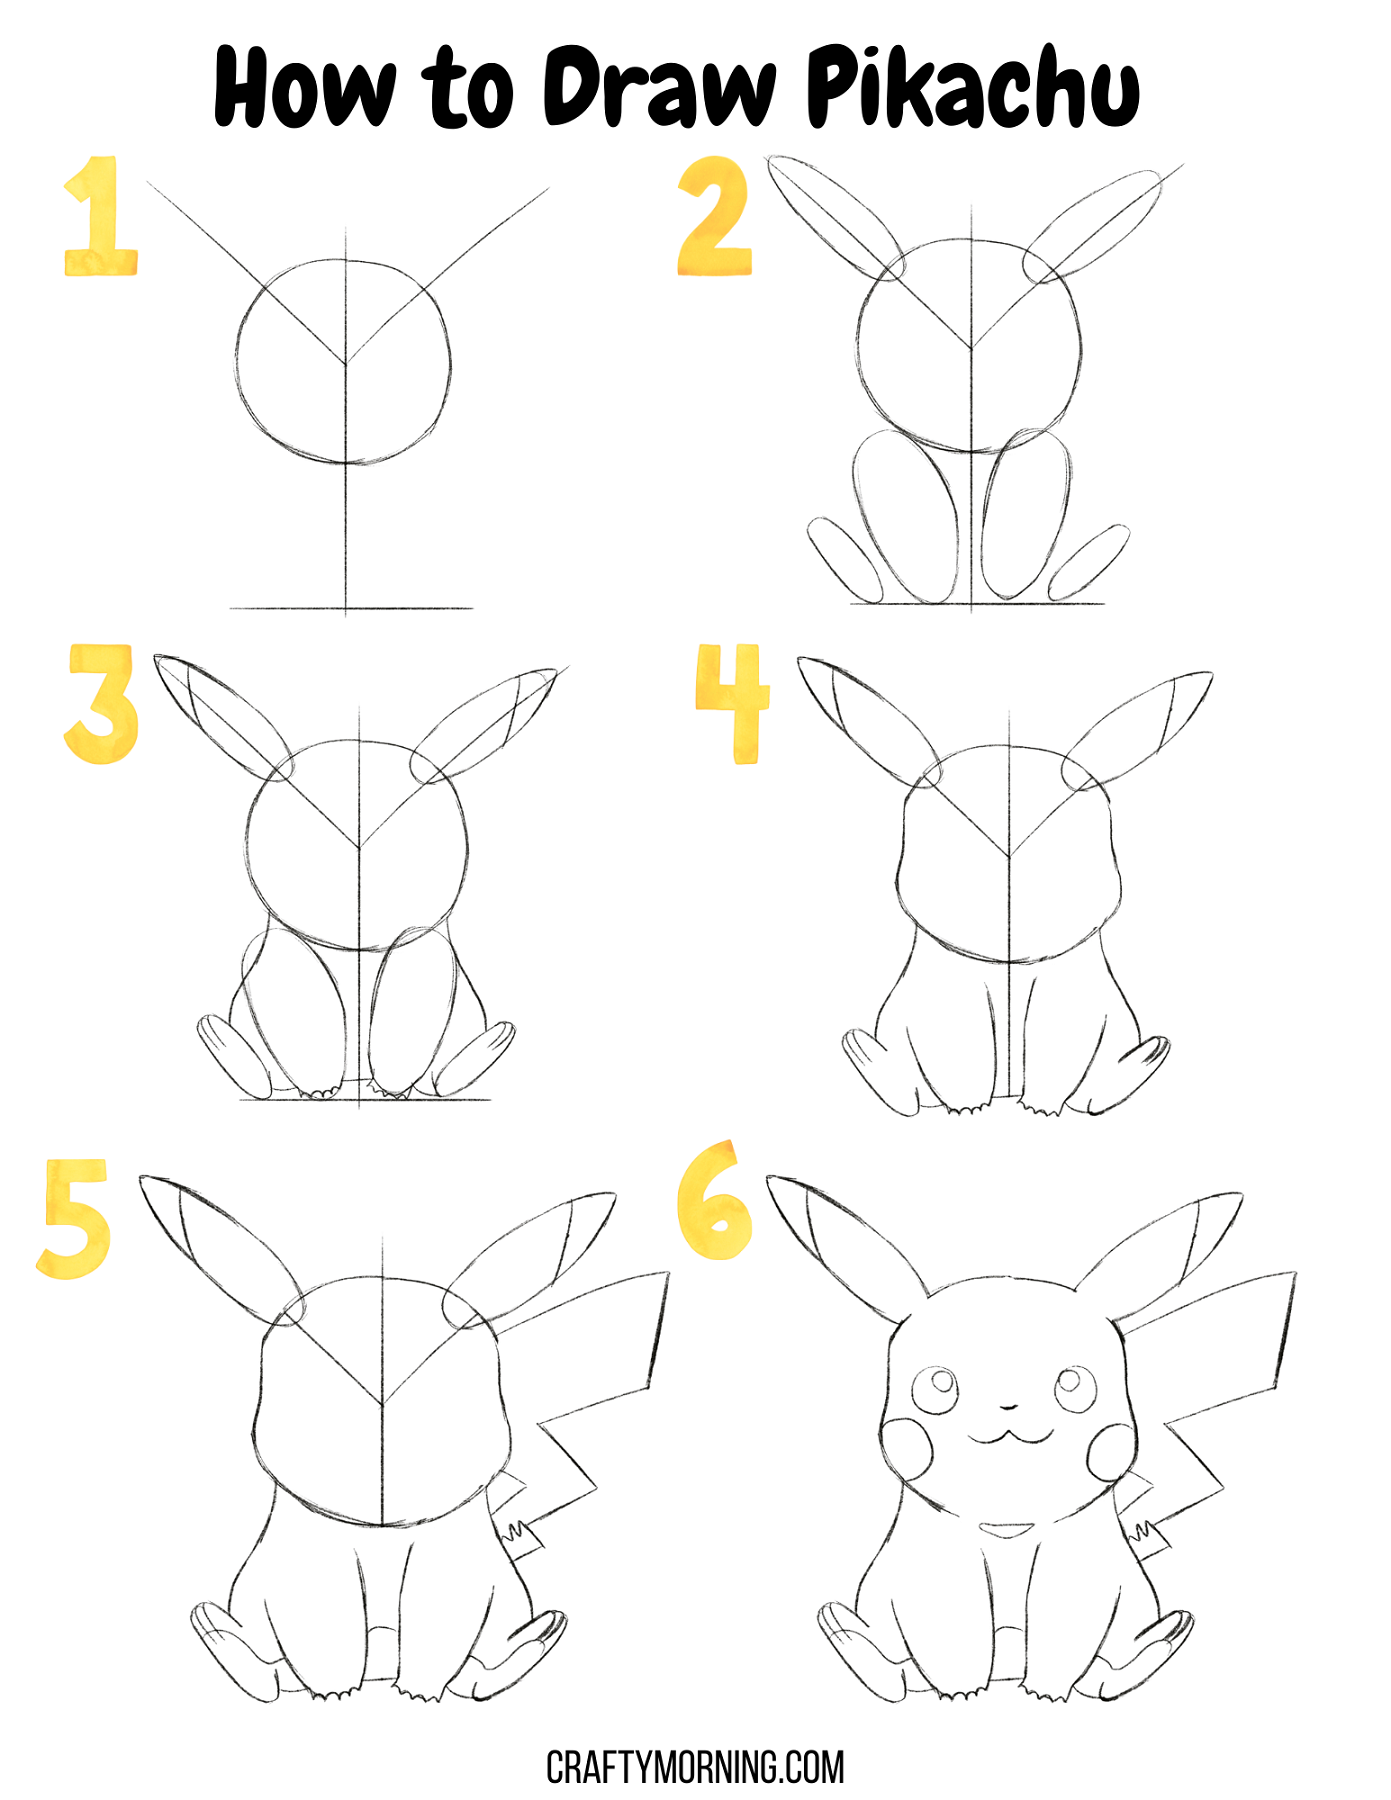 How To Draw Pikachu Easy, Step by Step, Drawing Guide, by Dawn |  dragoart.com | Cute easy drawings, Pikachu drawing, Pokemon drawings